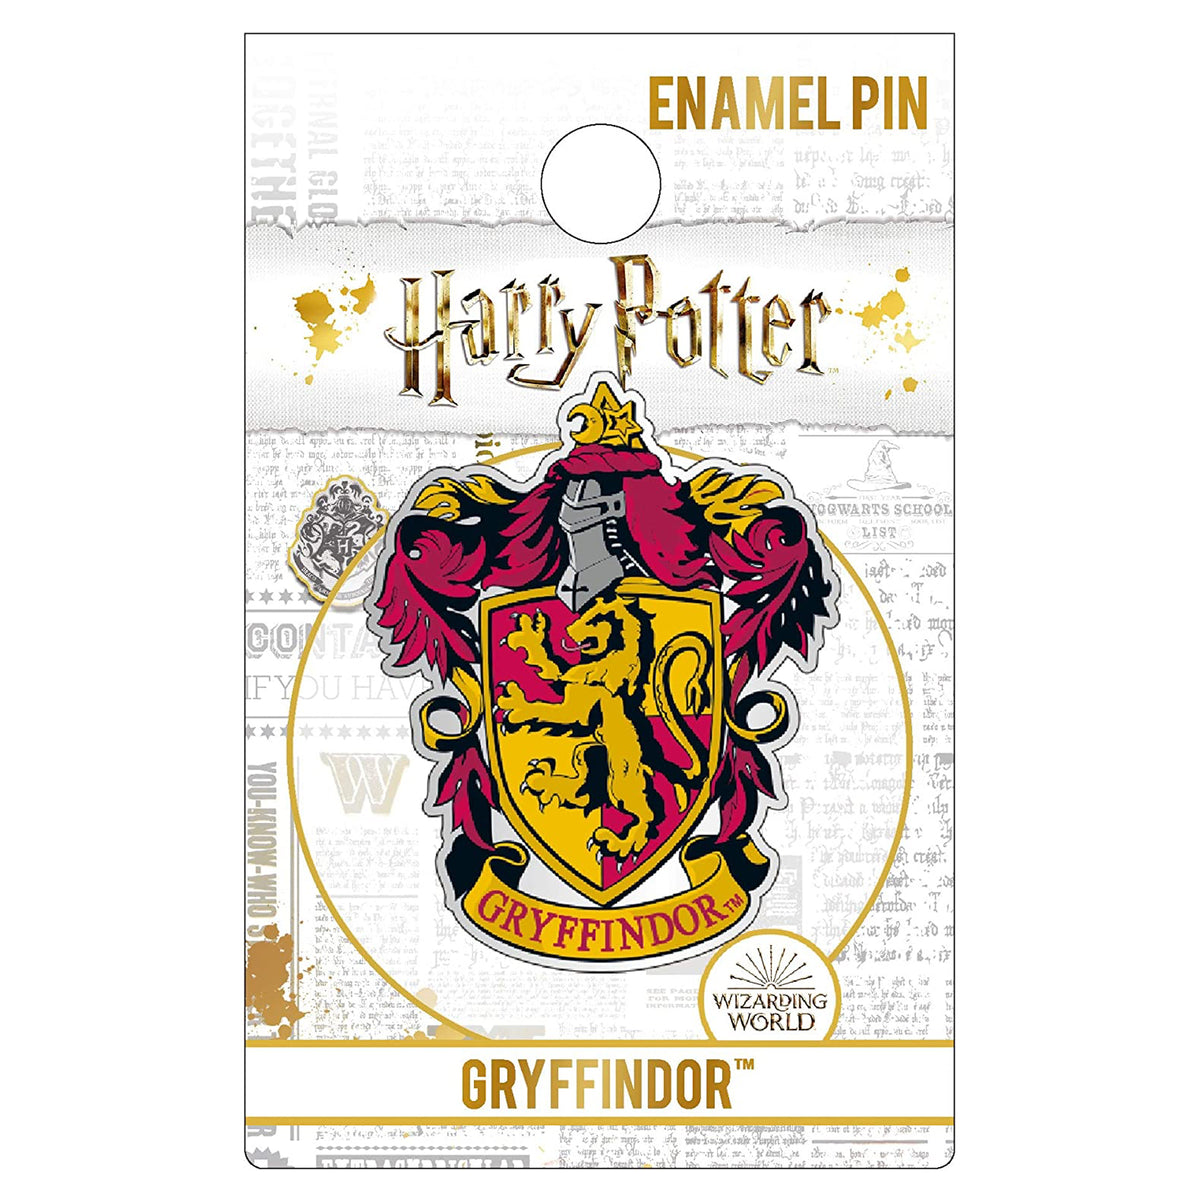 Harry Potter Gryffindor Crest Collectible Enamel Pin